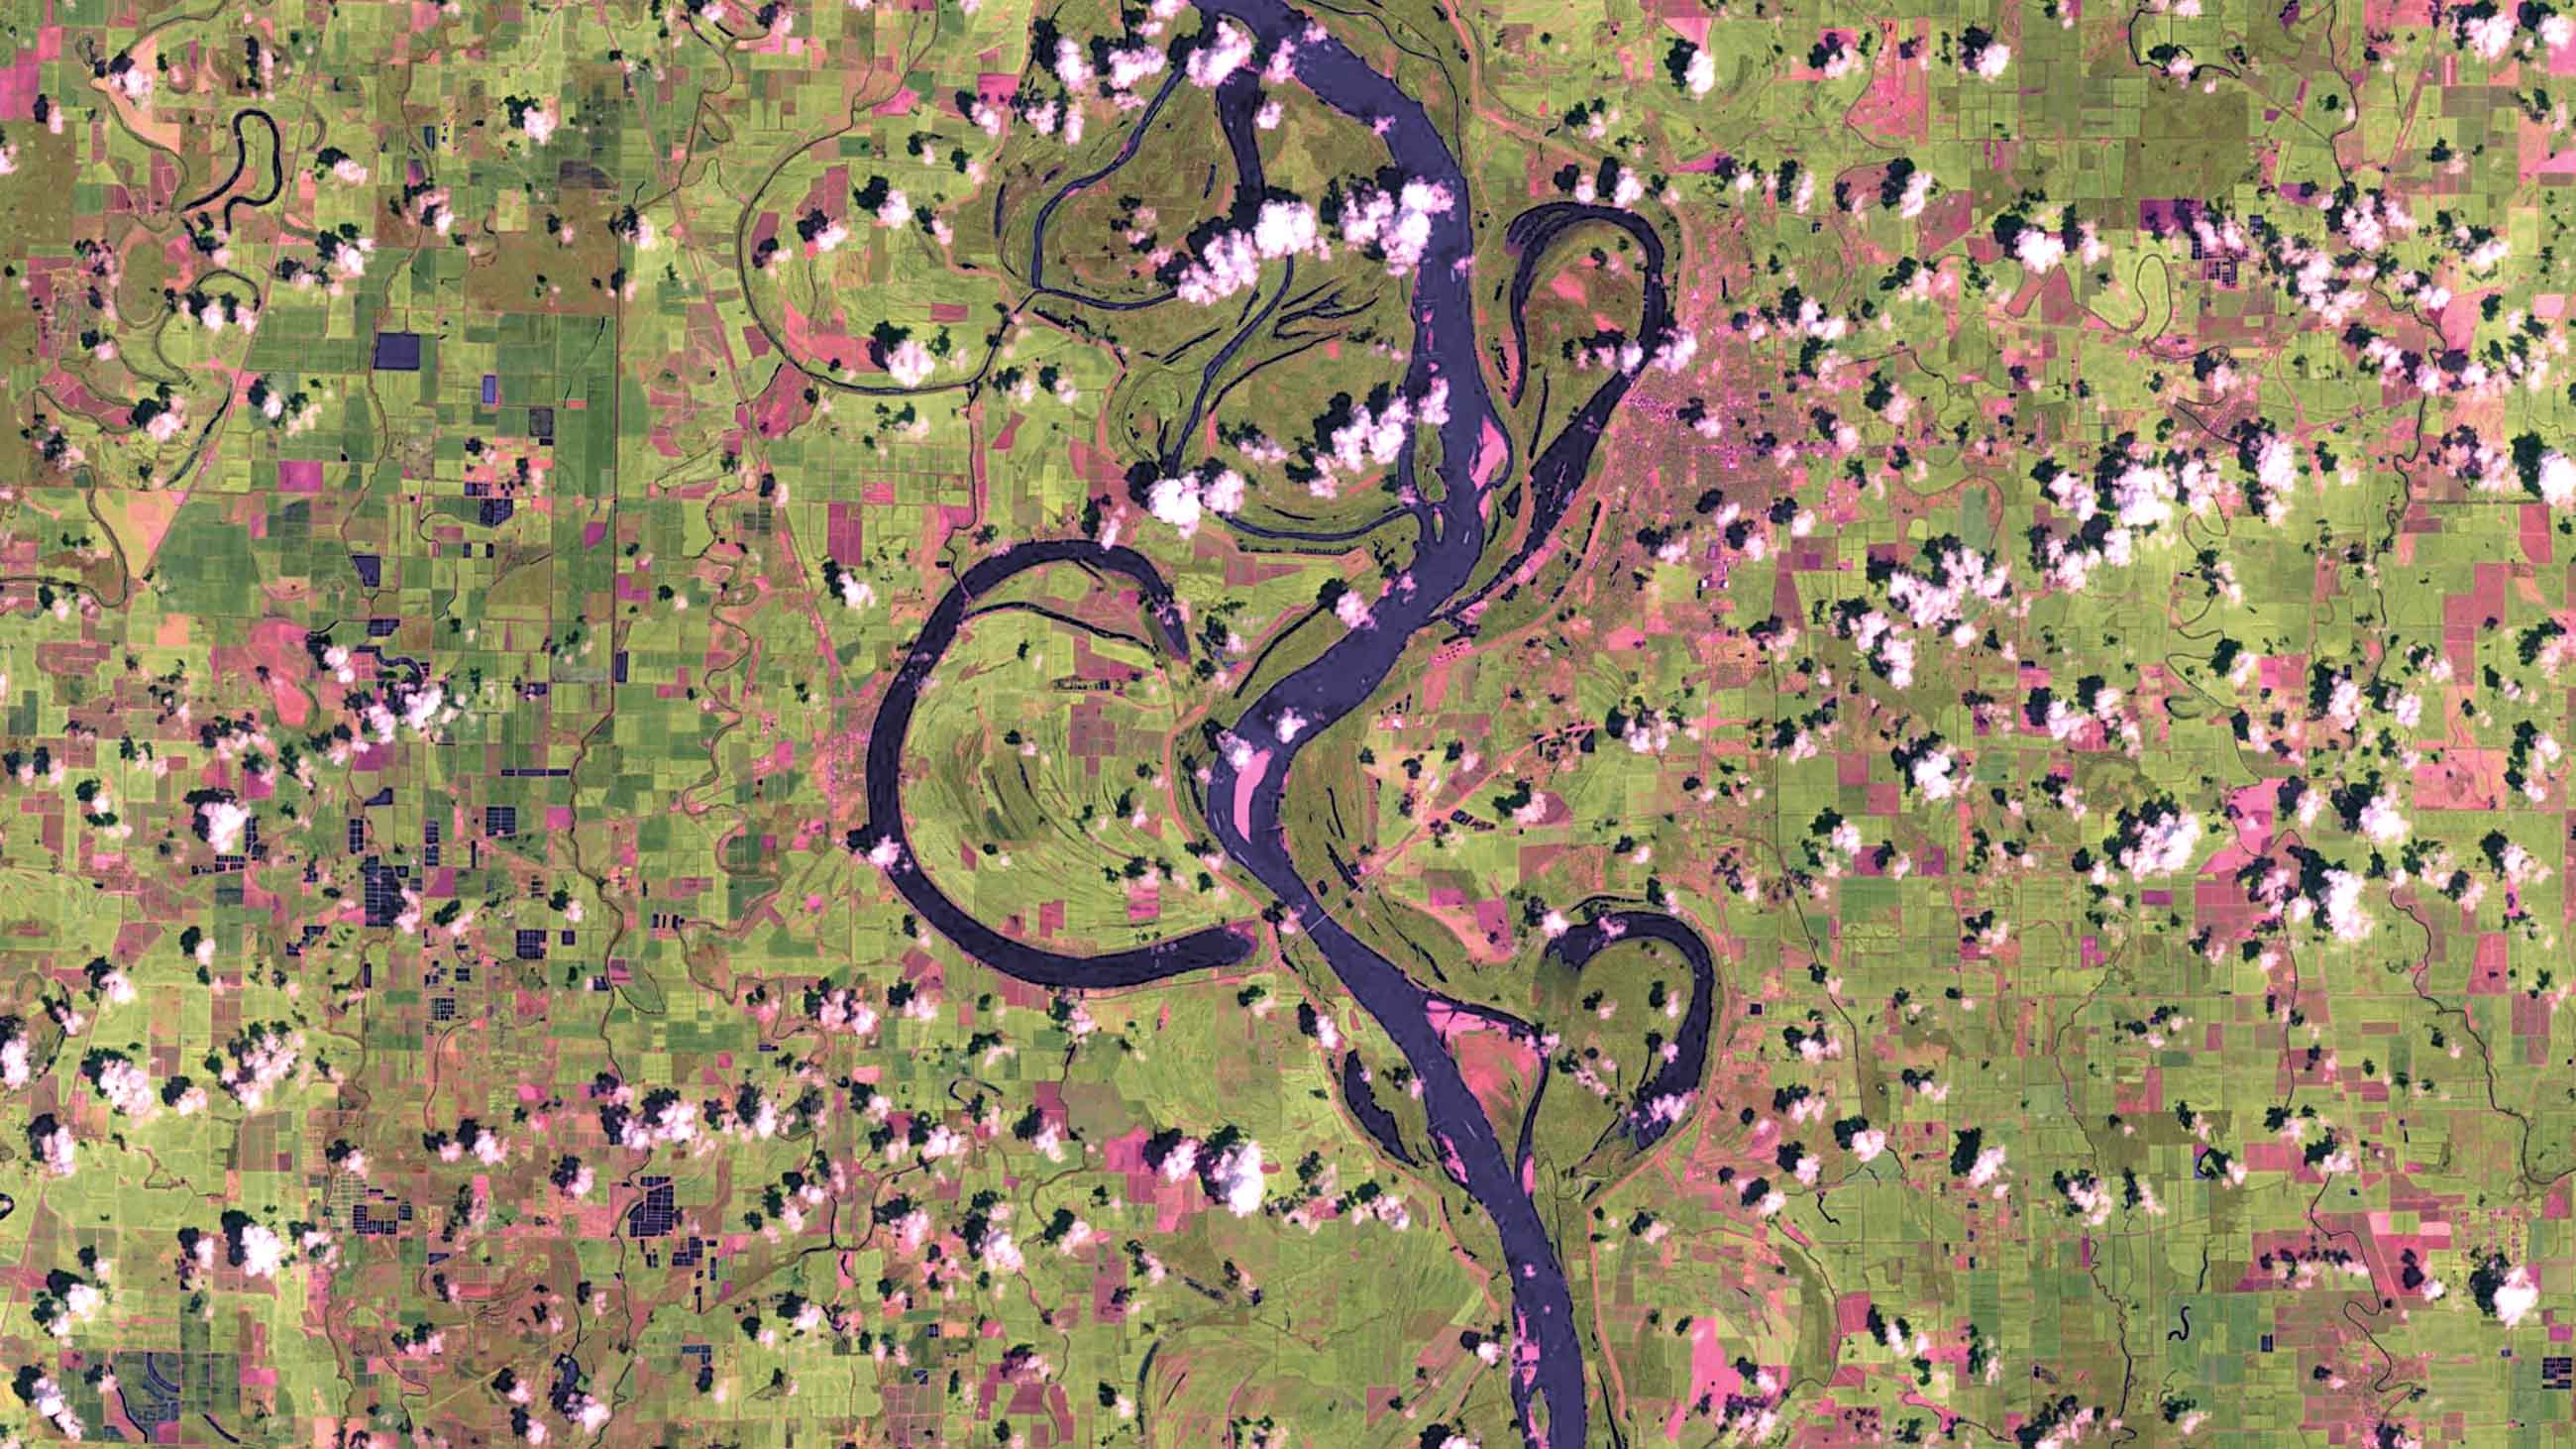 The horseshoe-shaped Lake Chicot on the left bank of the Mississippi River in Arkansas is the largest of numerous oxbow lakes that used to form through seasonal flood of the Mississippi. That doesn't happen anymore.